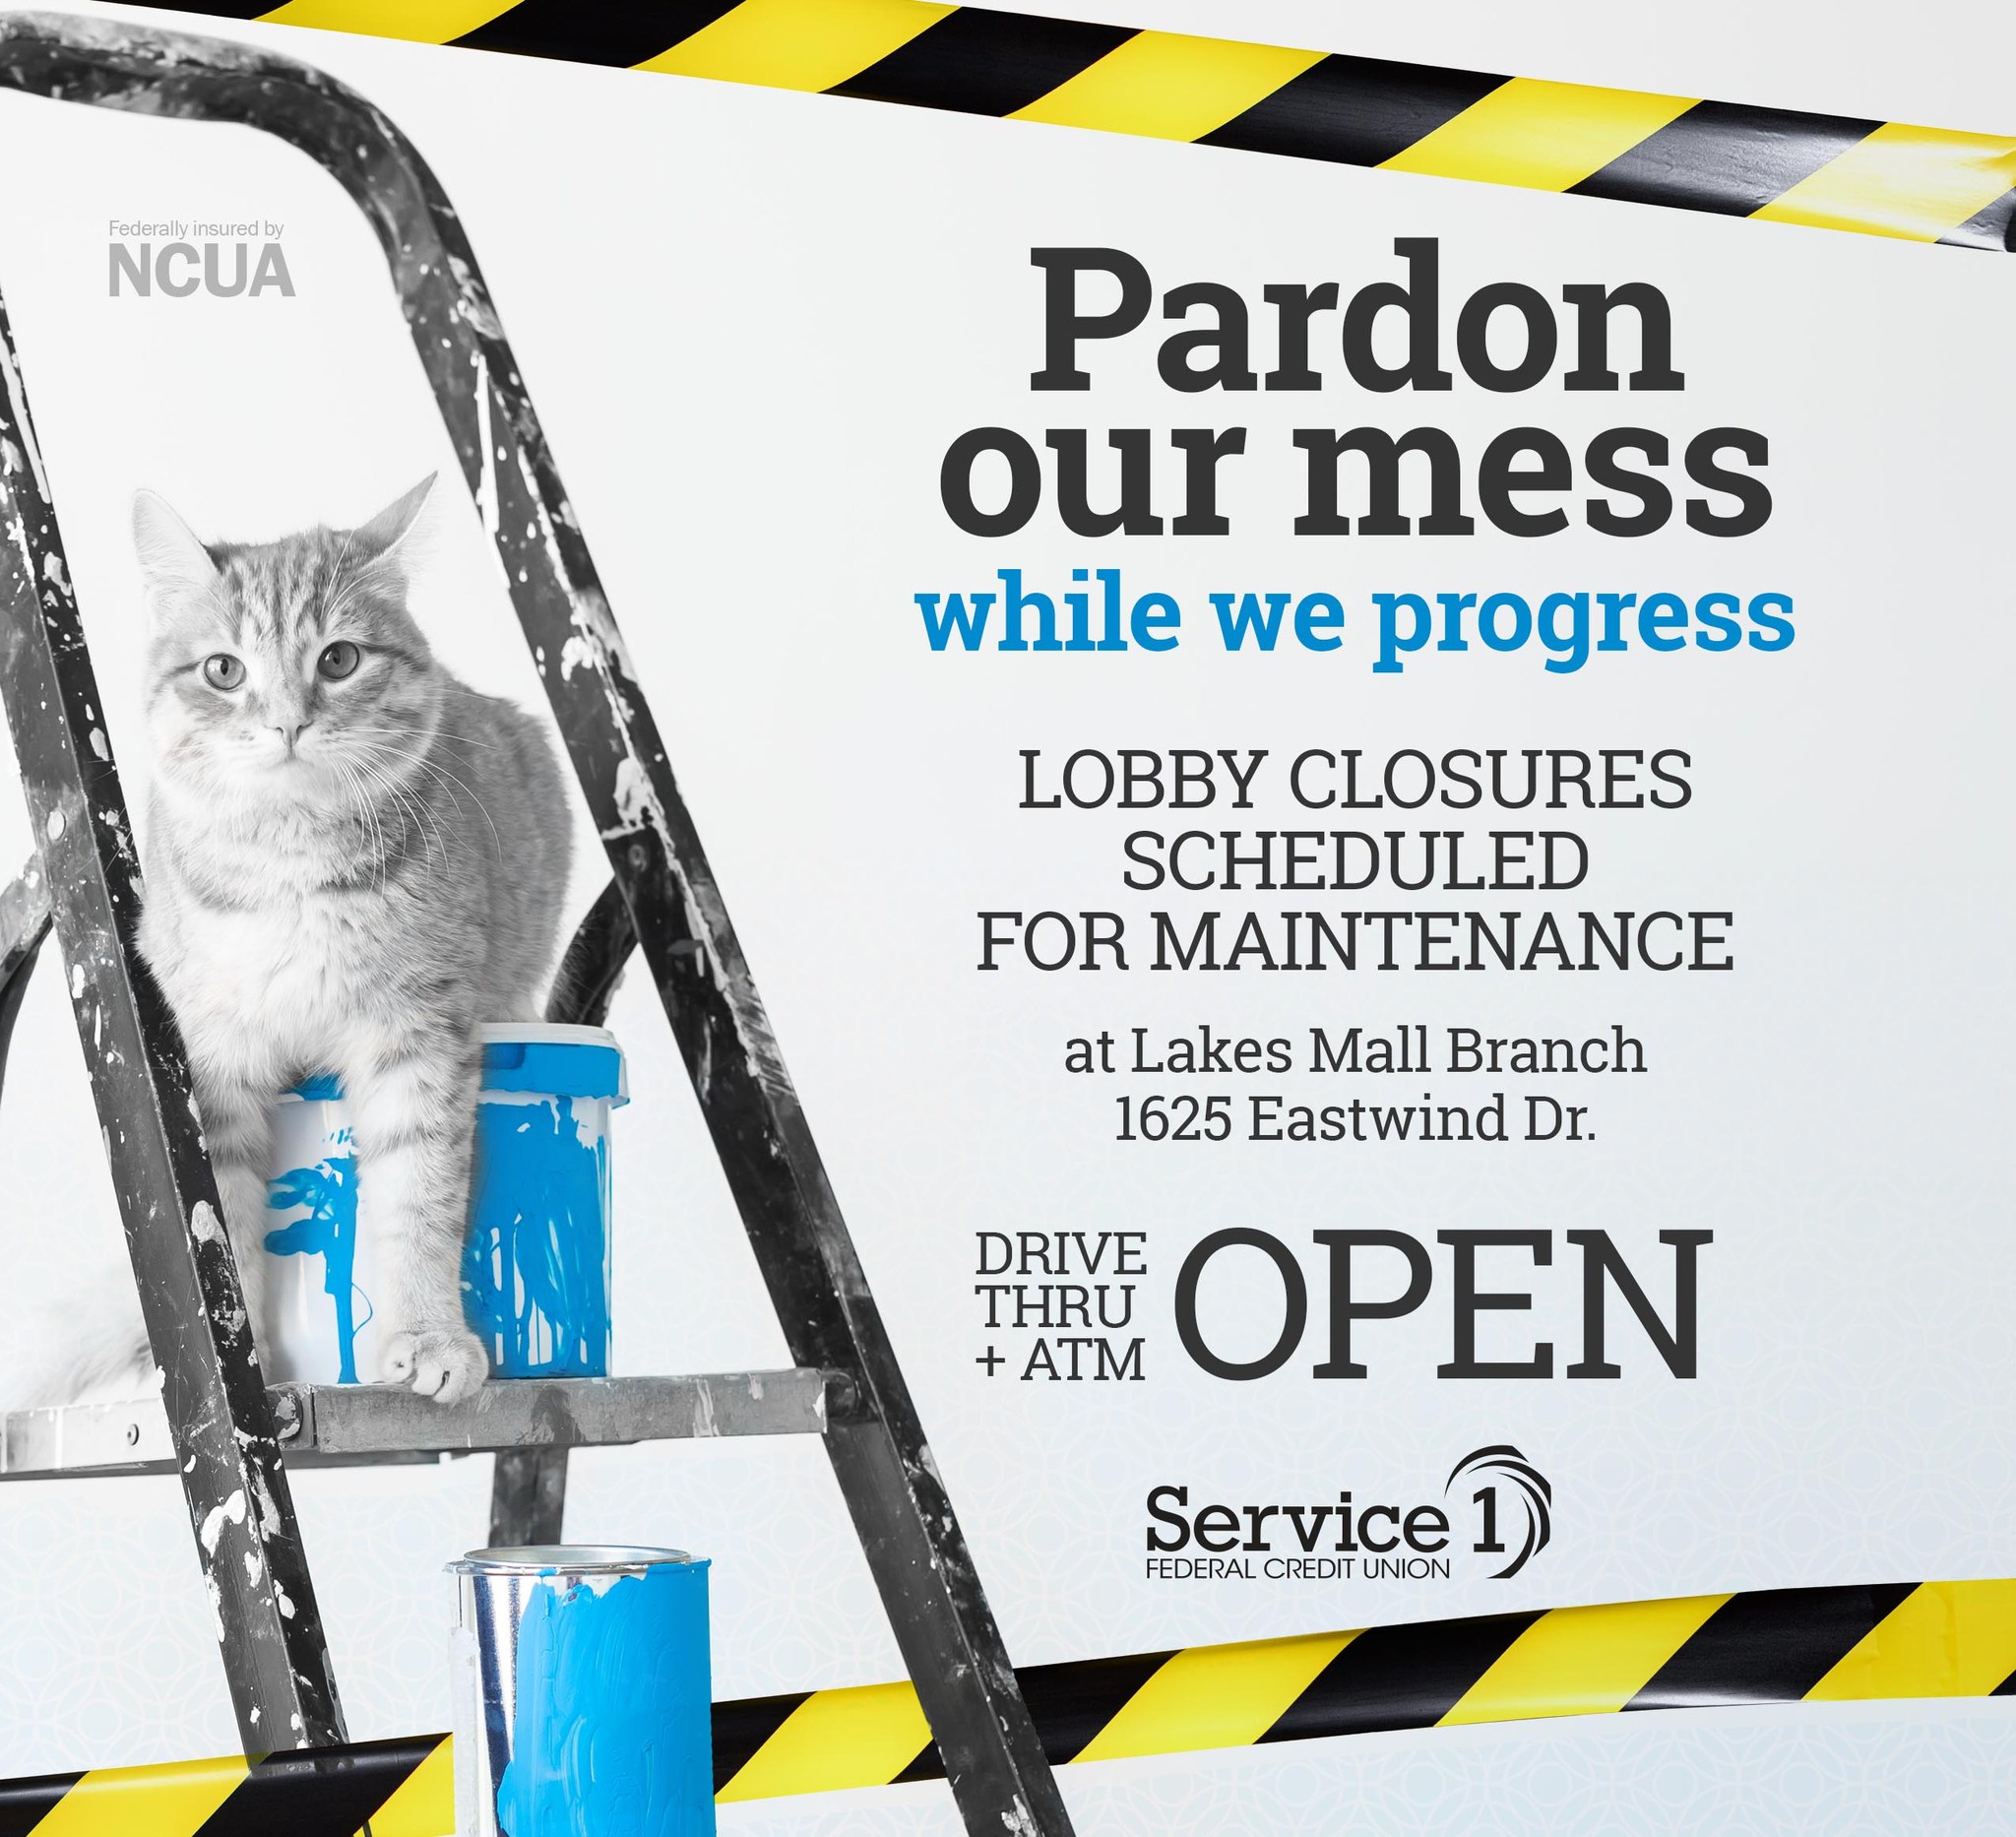 cat on ladder with caution tape and headline "pardon our mess"